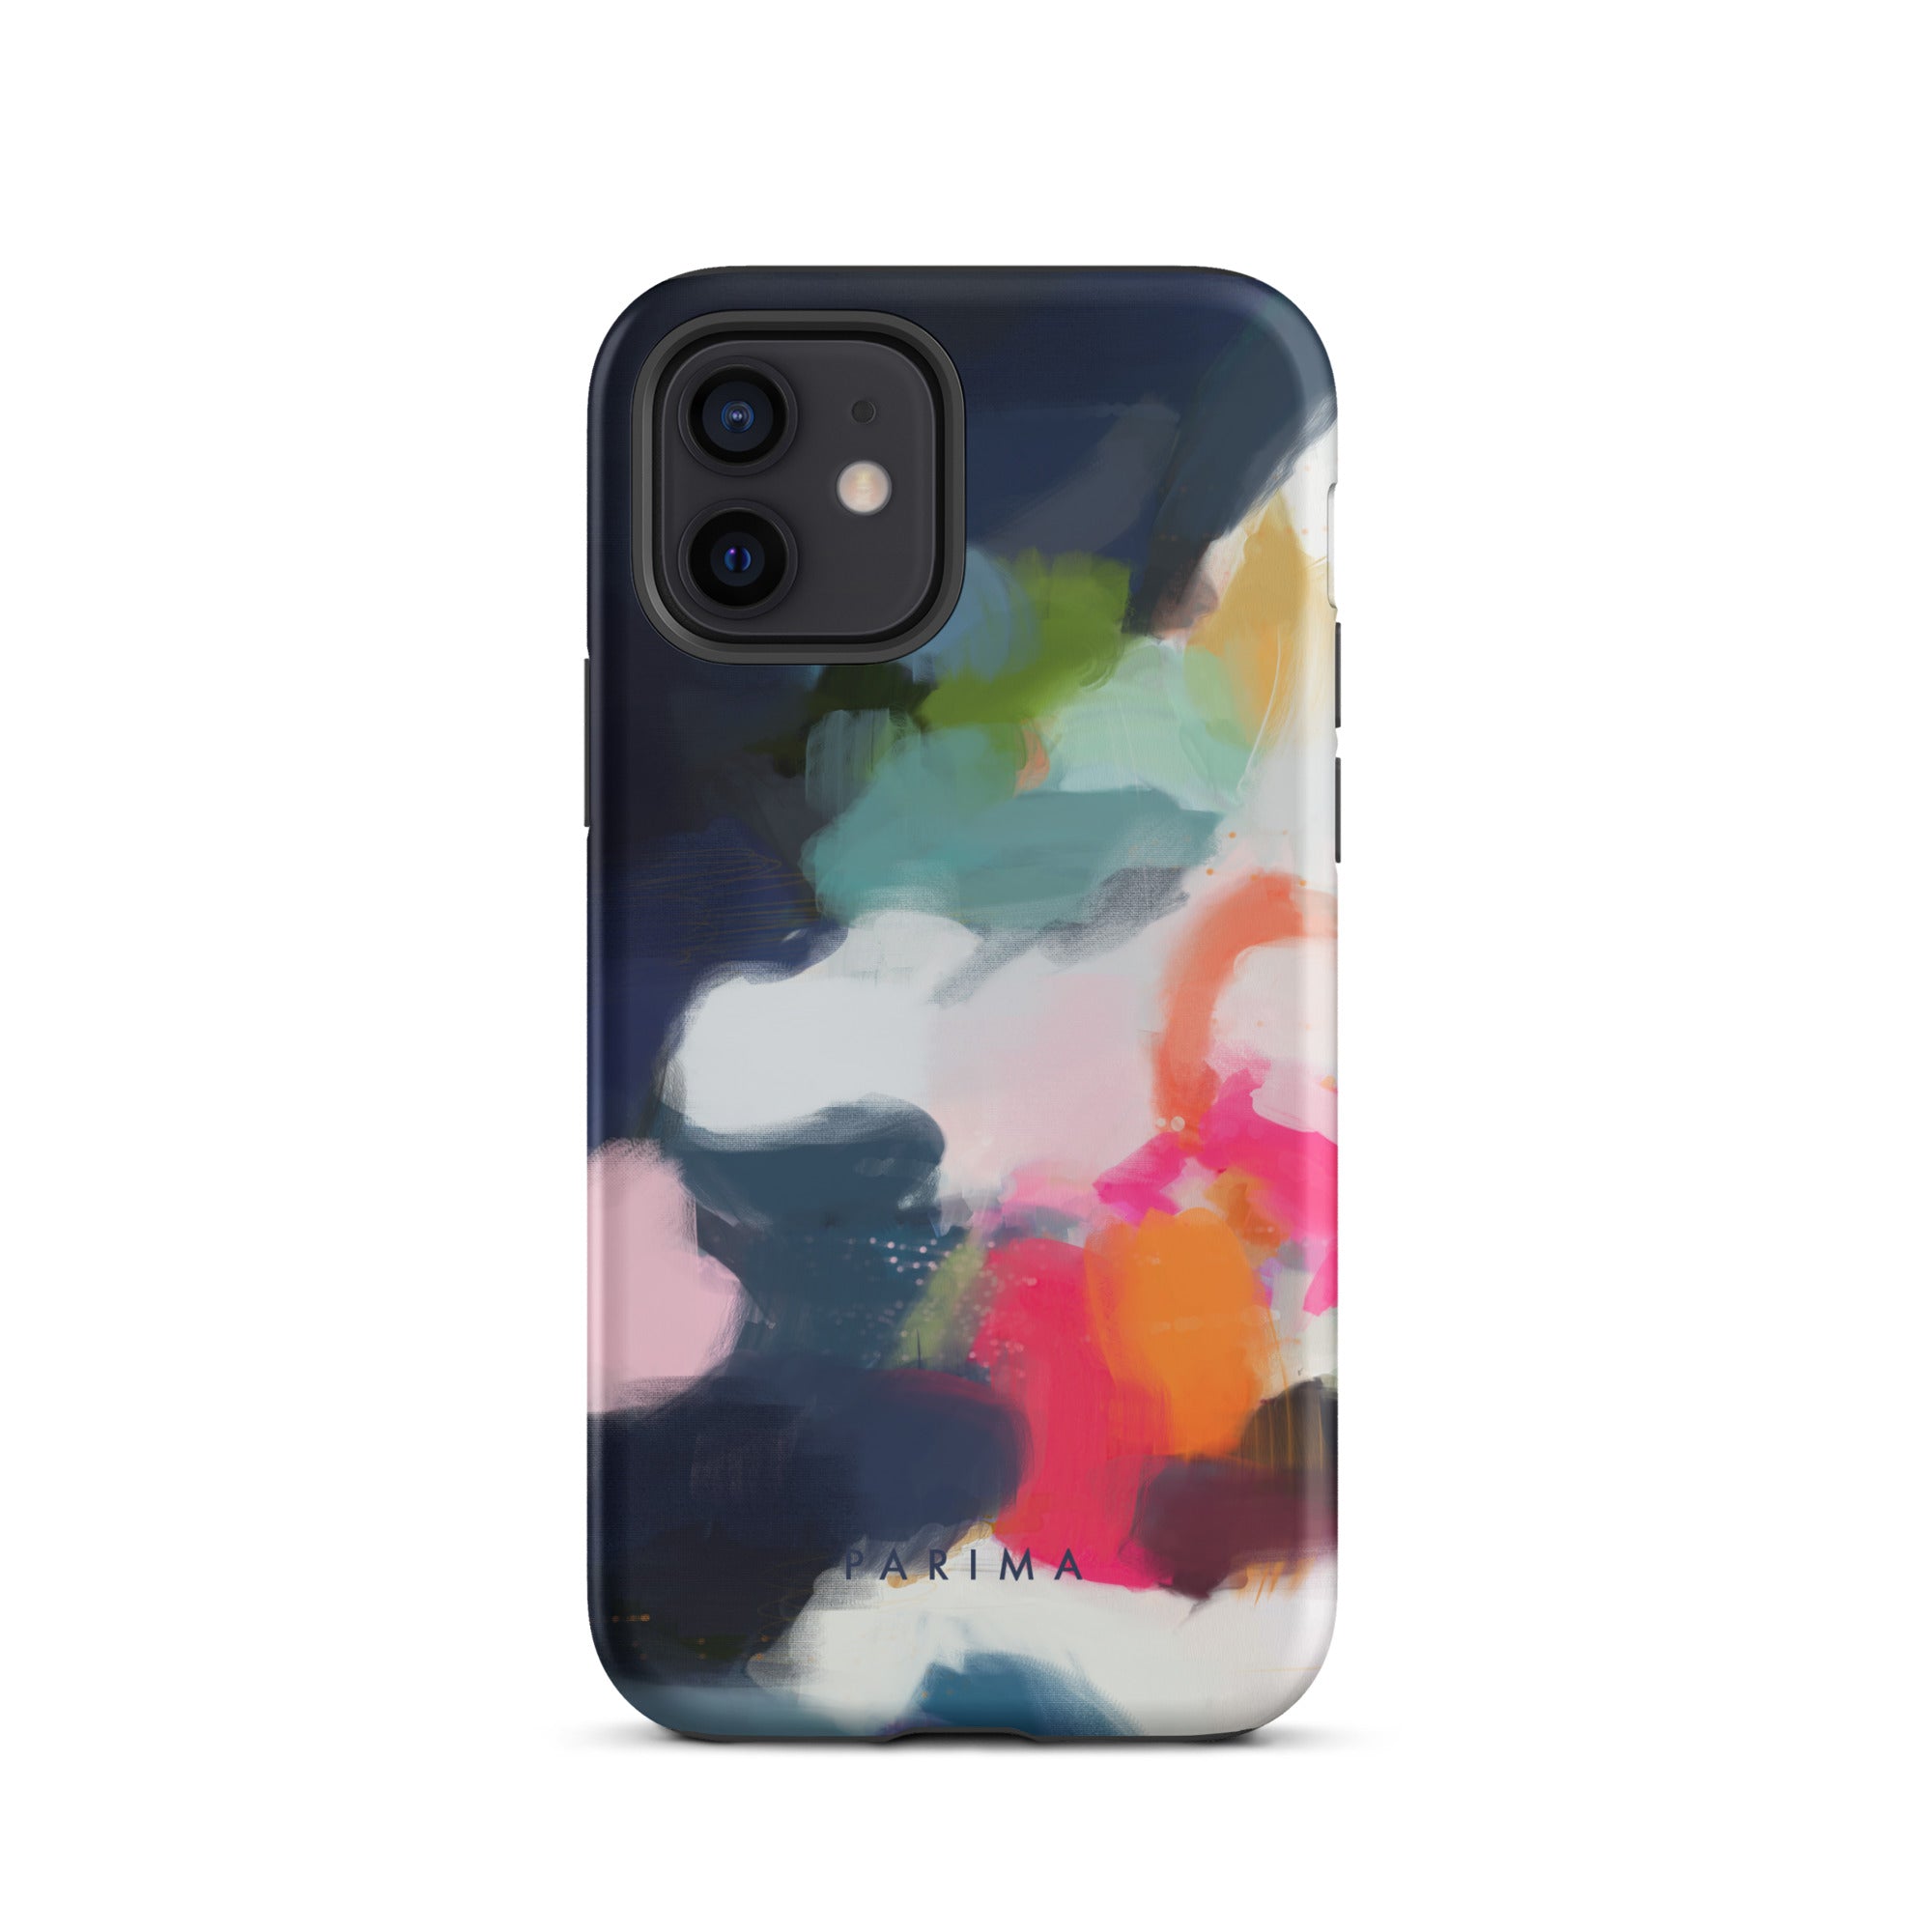 Eliza, pink and blue abstract art - iPhone 12 tough case by Parima Studio